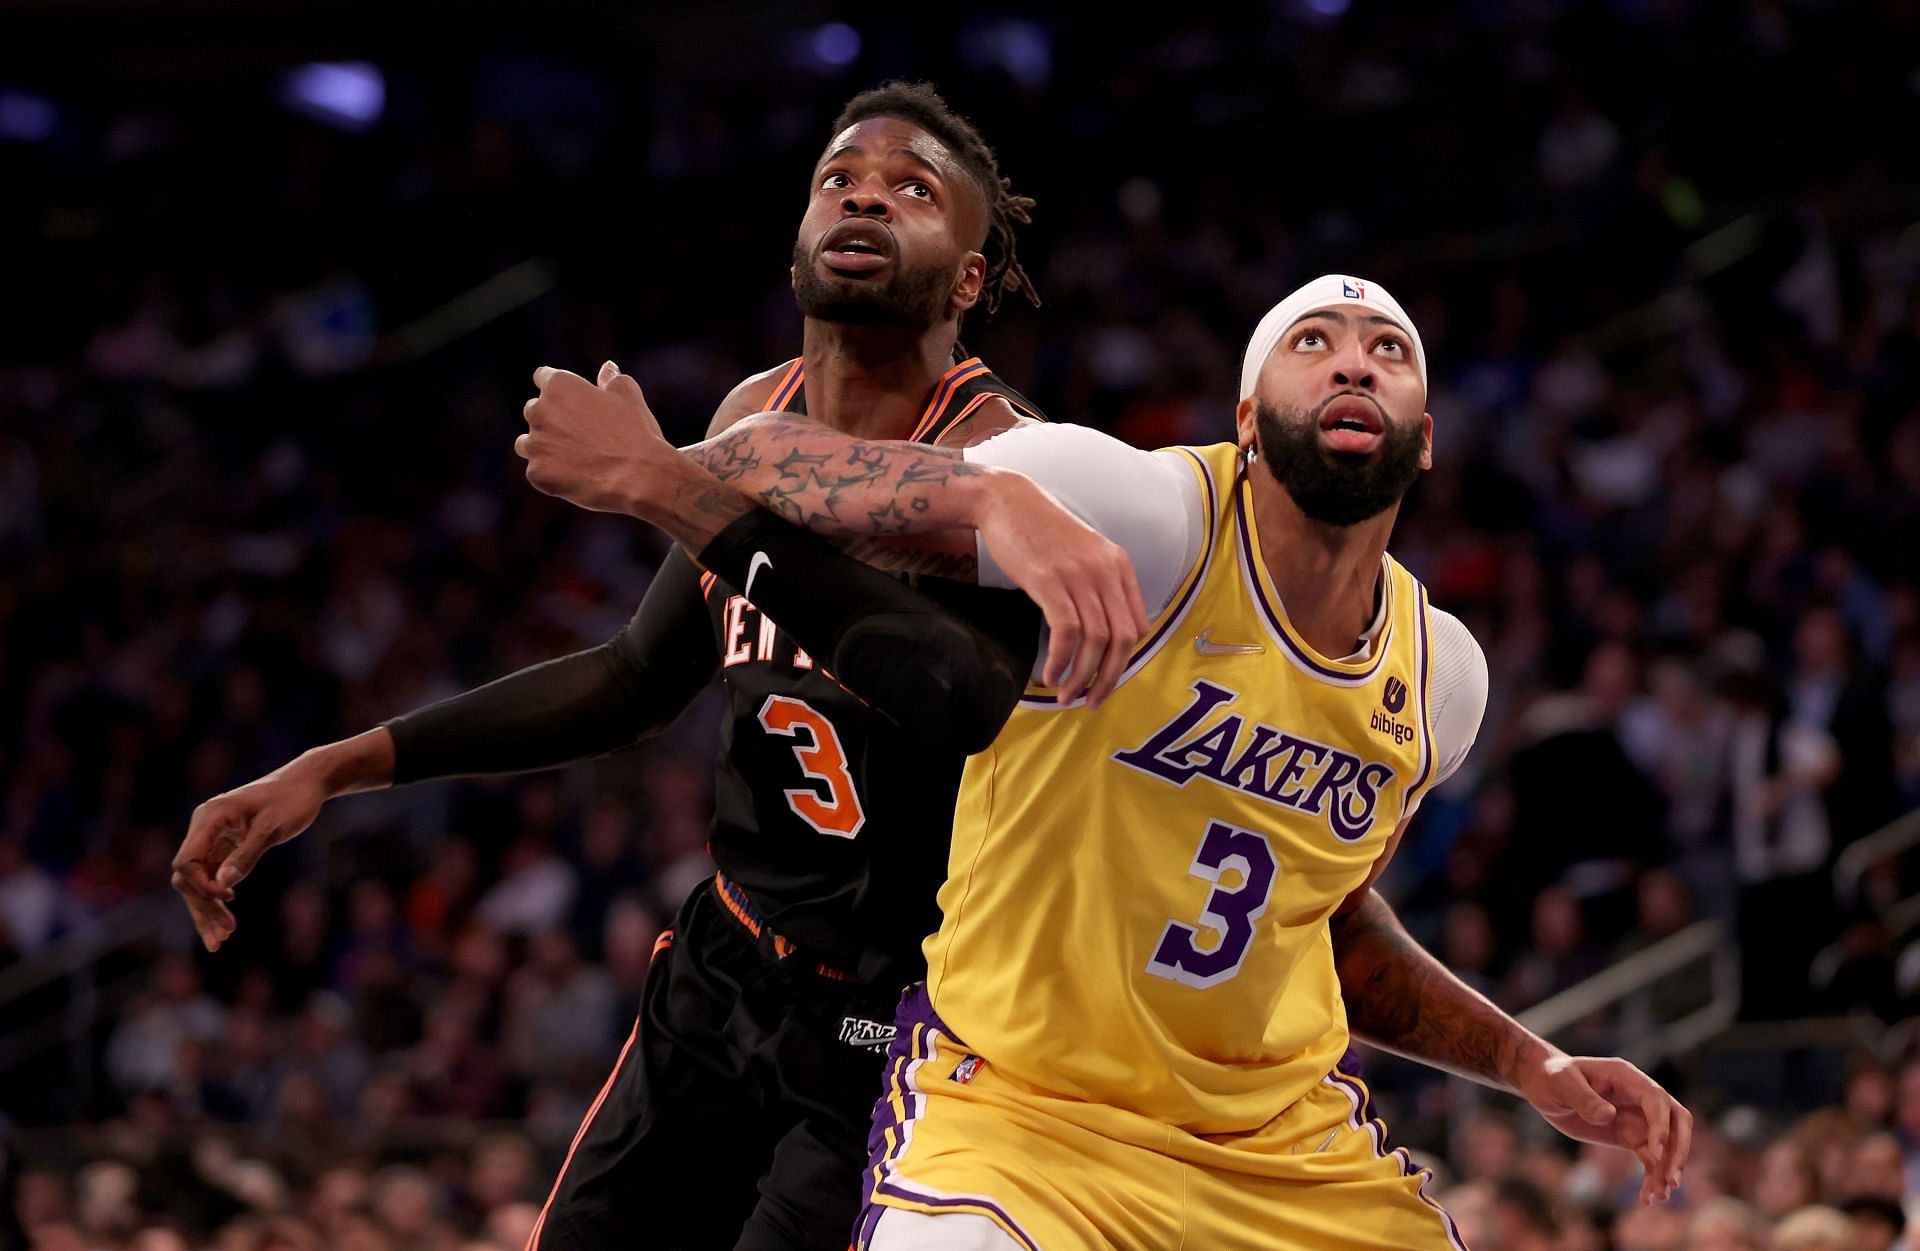 Los Angeles Lakers All-Star Anthony Davis boxing out a defender